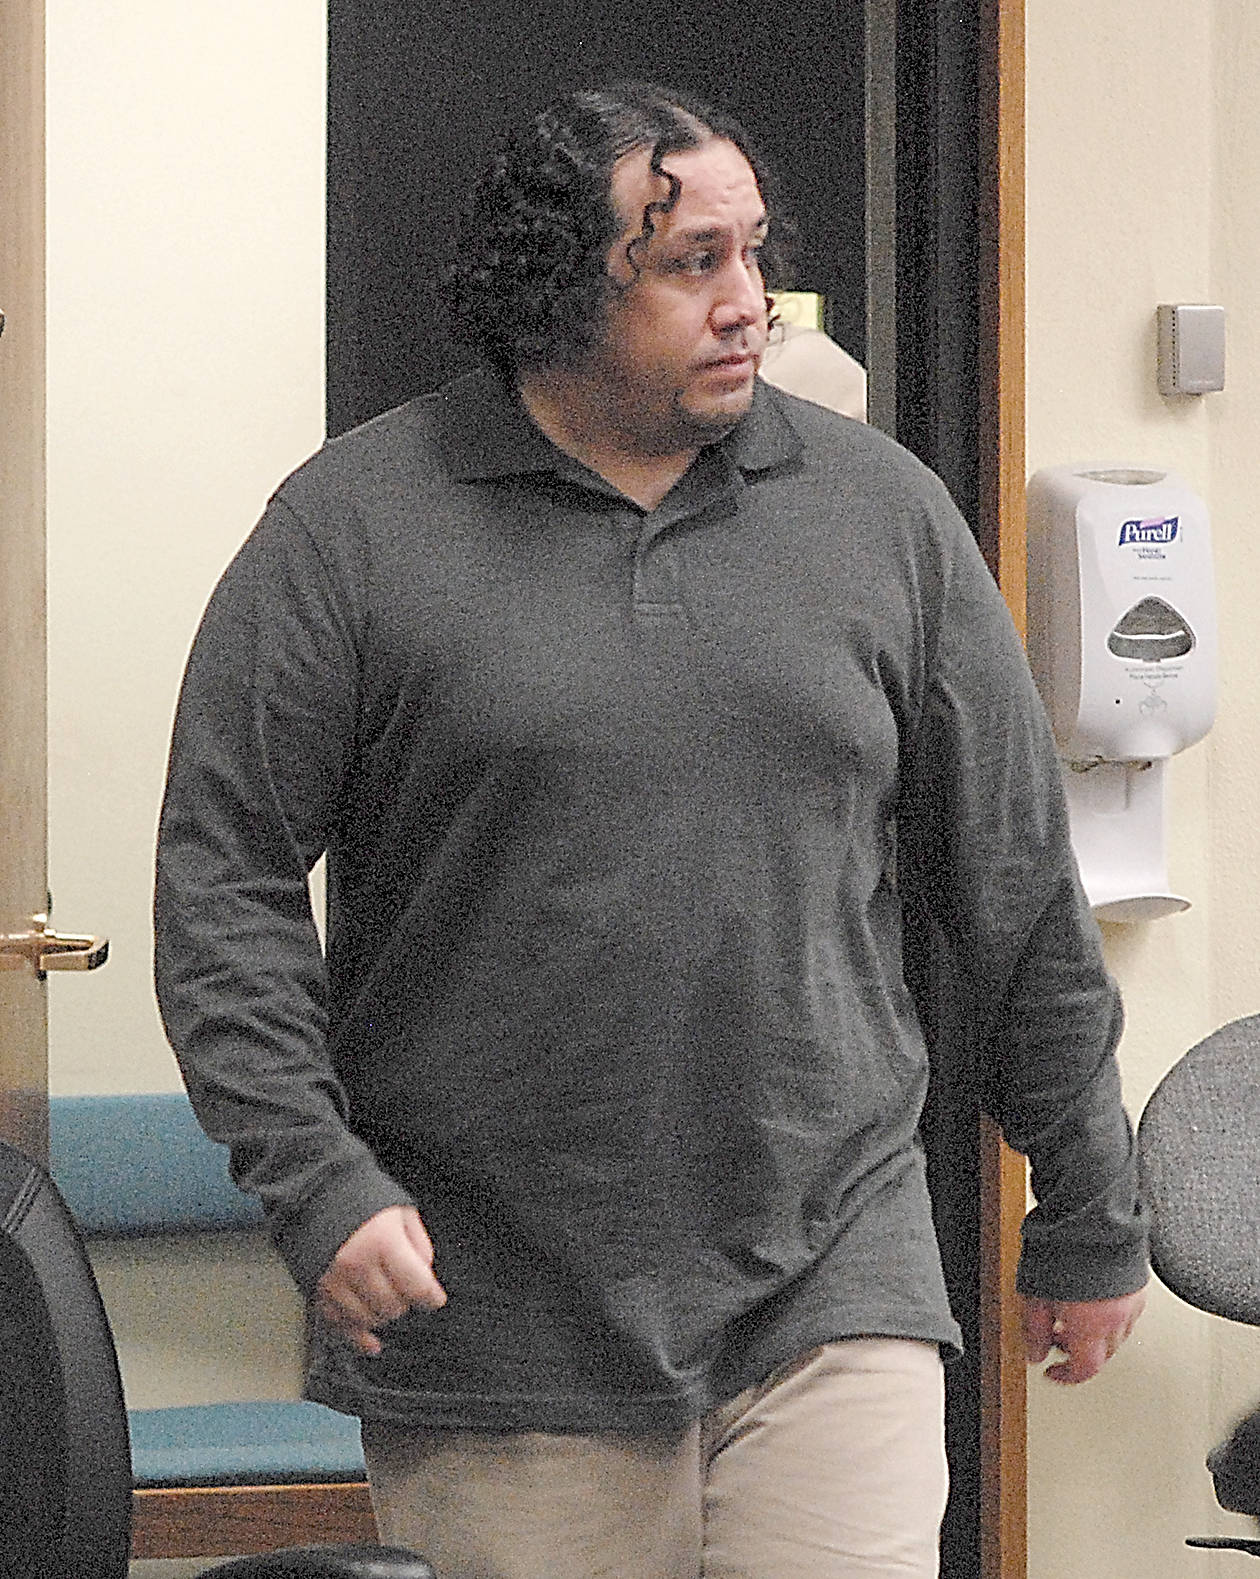 Beaver woman testifies in trial for arson, other charges